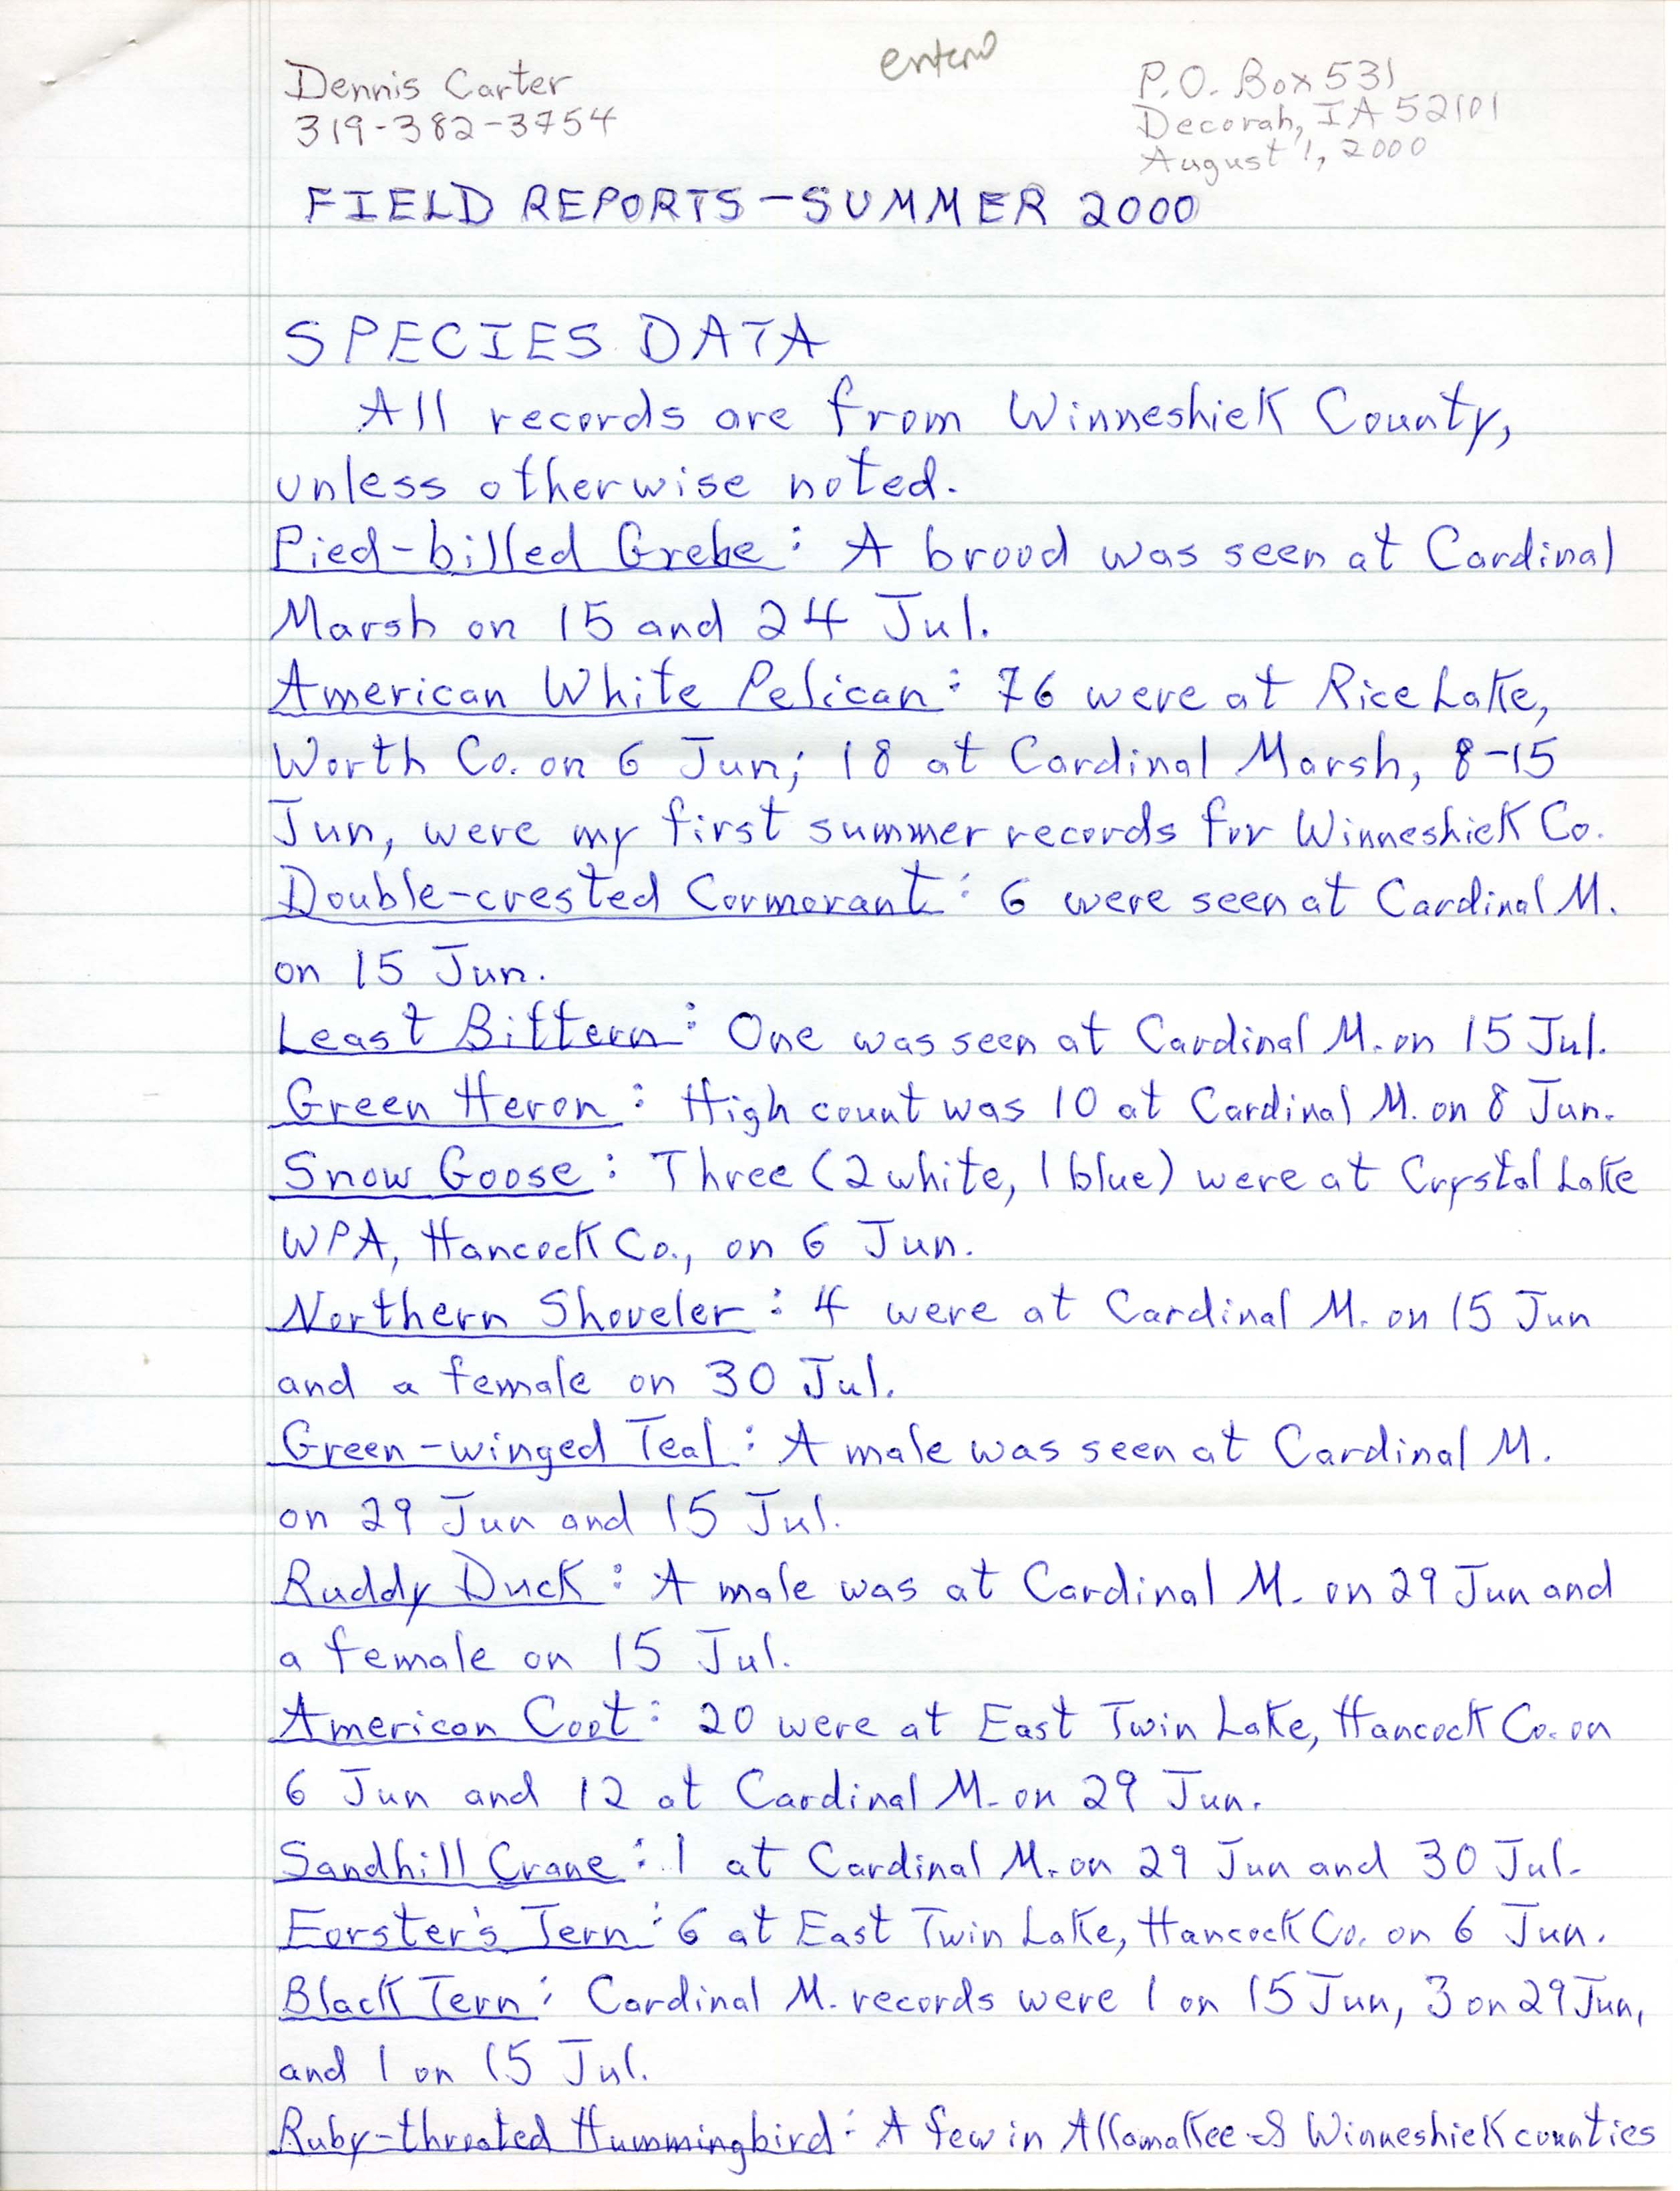 Field notes contributed by Dennis L. Carter, August 1, 2000